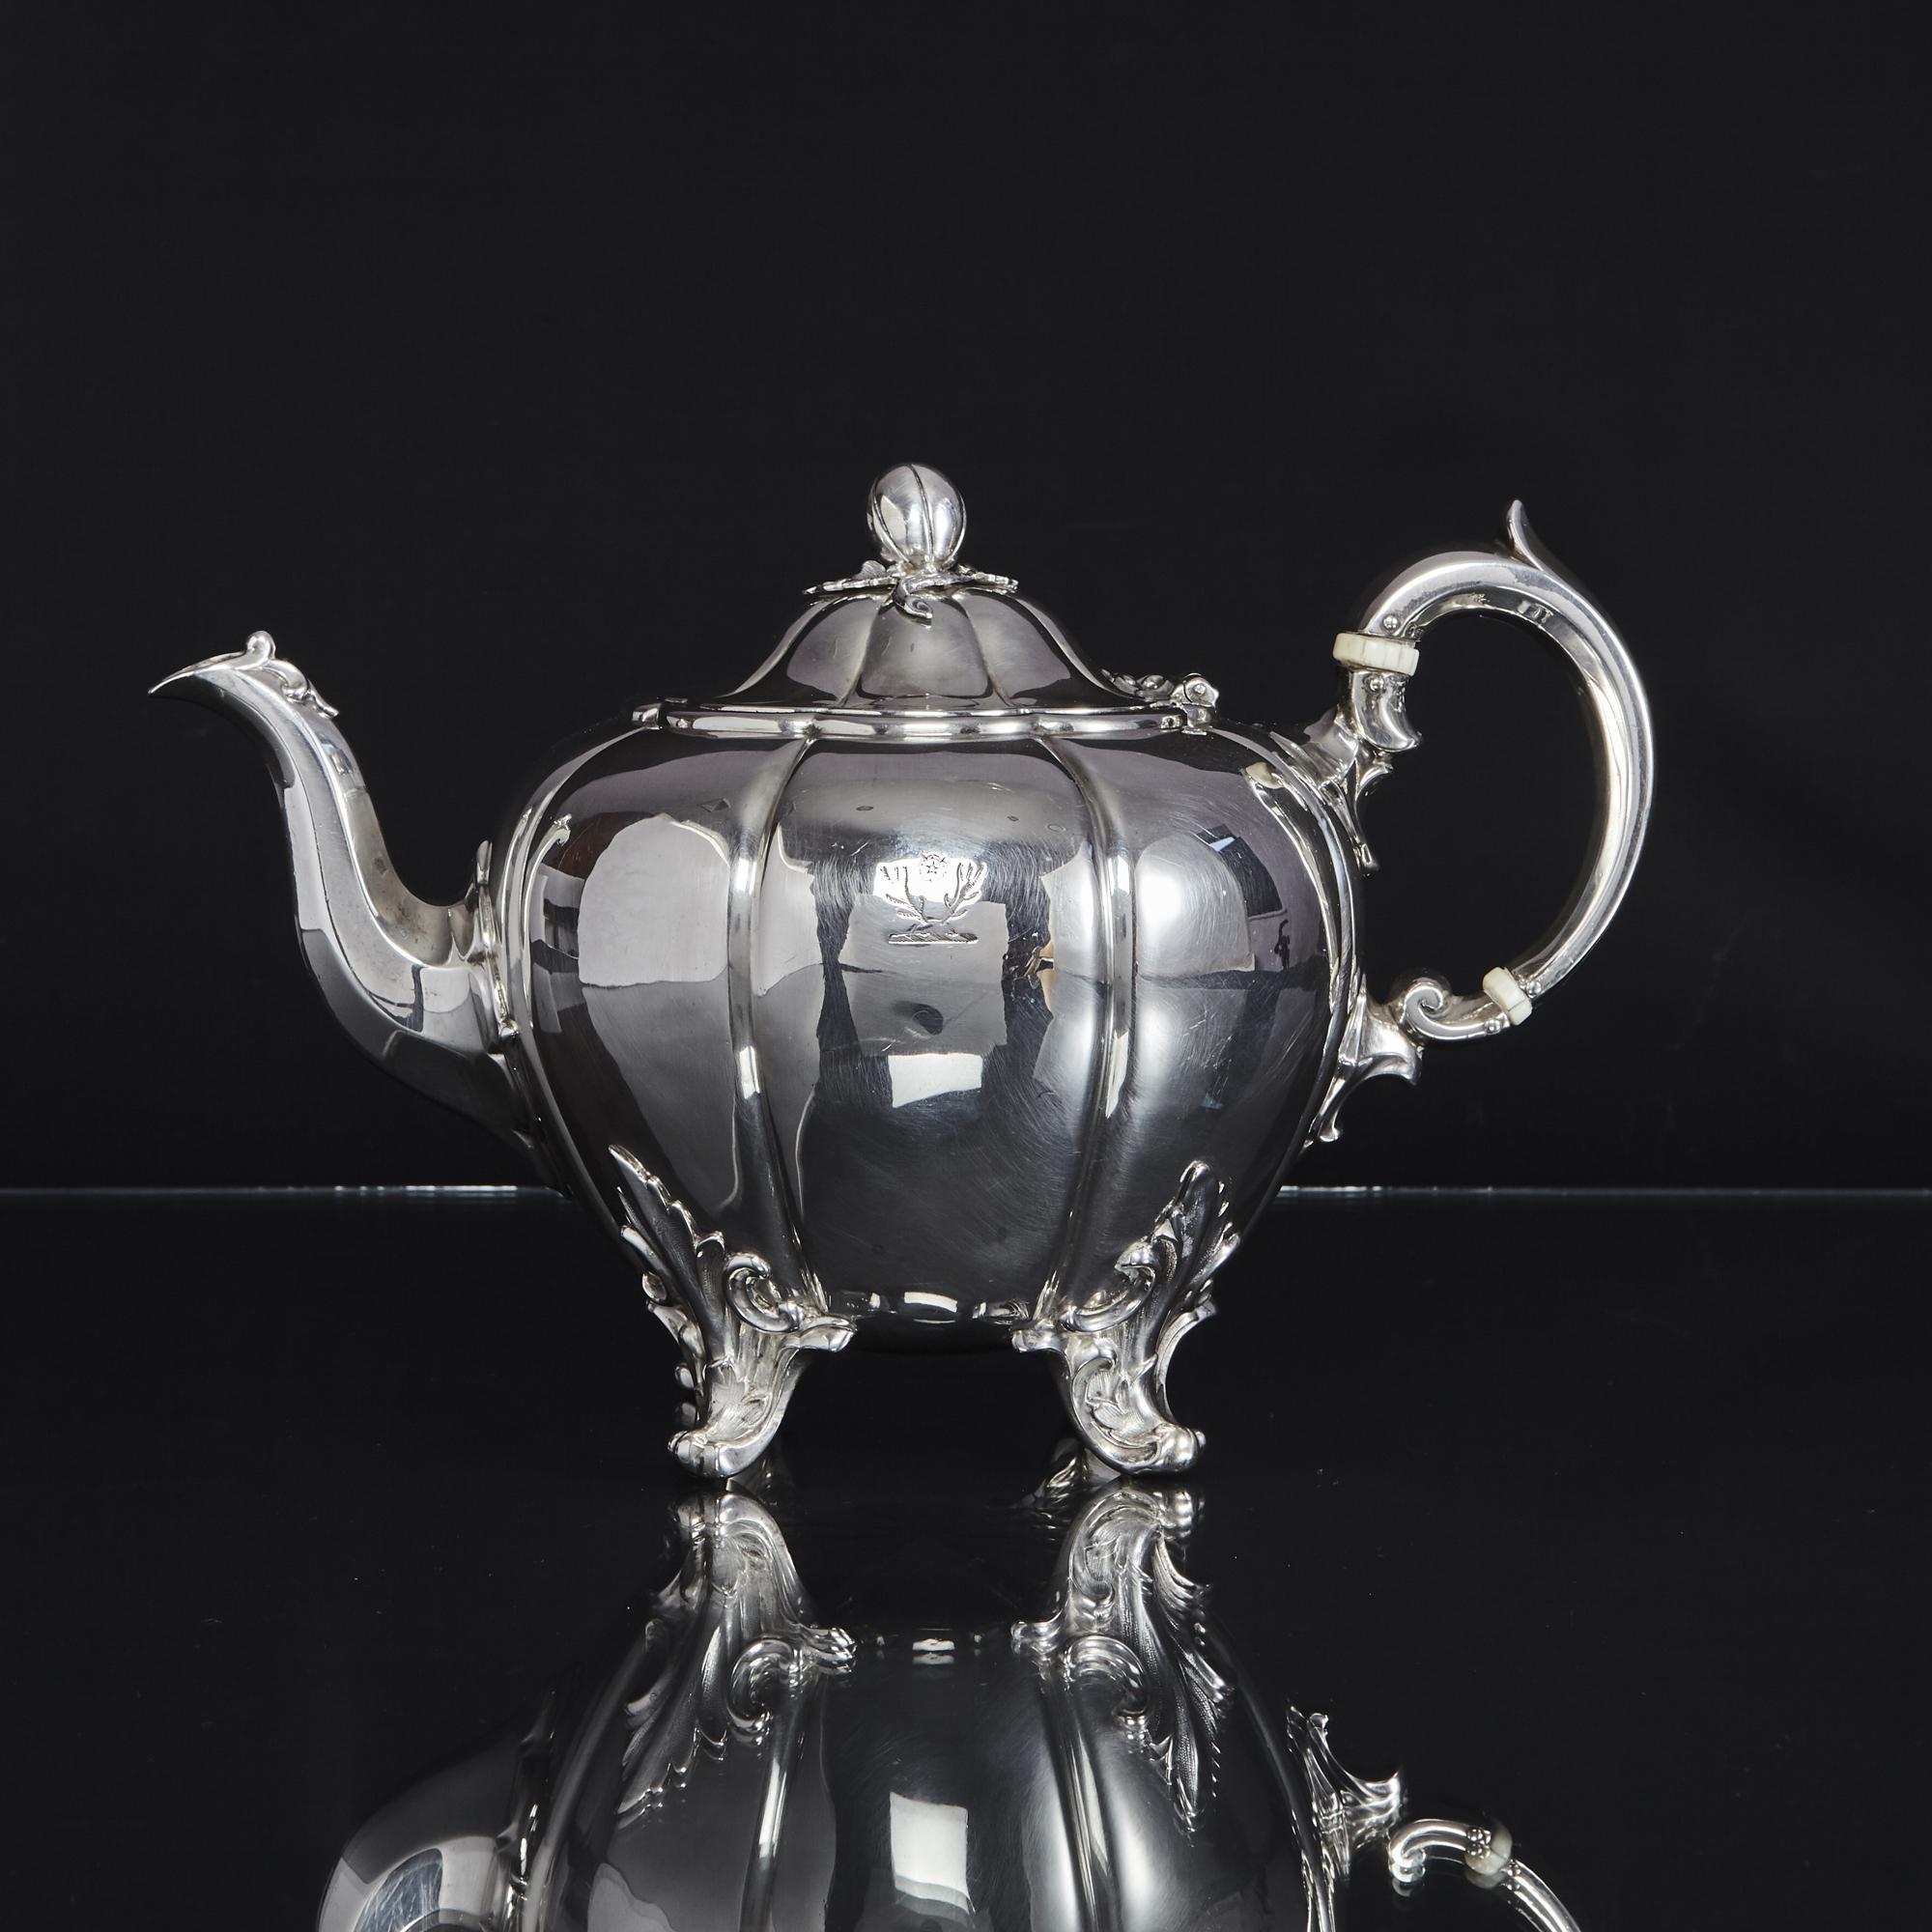 An elegant version of the classic melon pattern, this hand-raised, four-piece antique silver tea and coffee set comprises a coffee and tea pot, milk jug and sugar bowl; the latter two pieces have gilded interiors. Each piece rests on four scroll